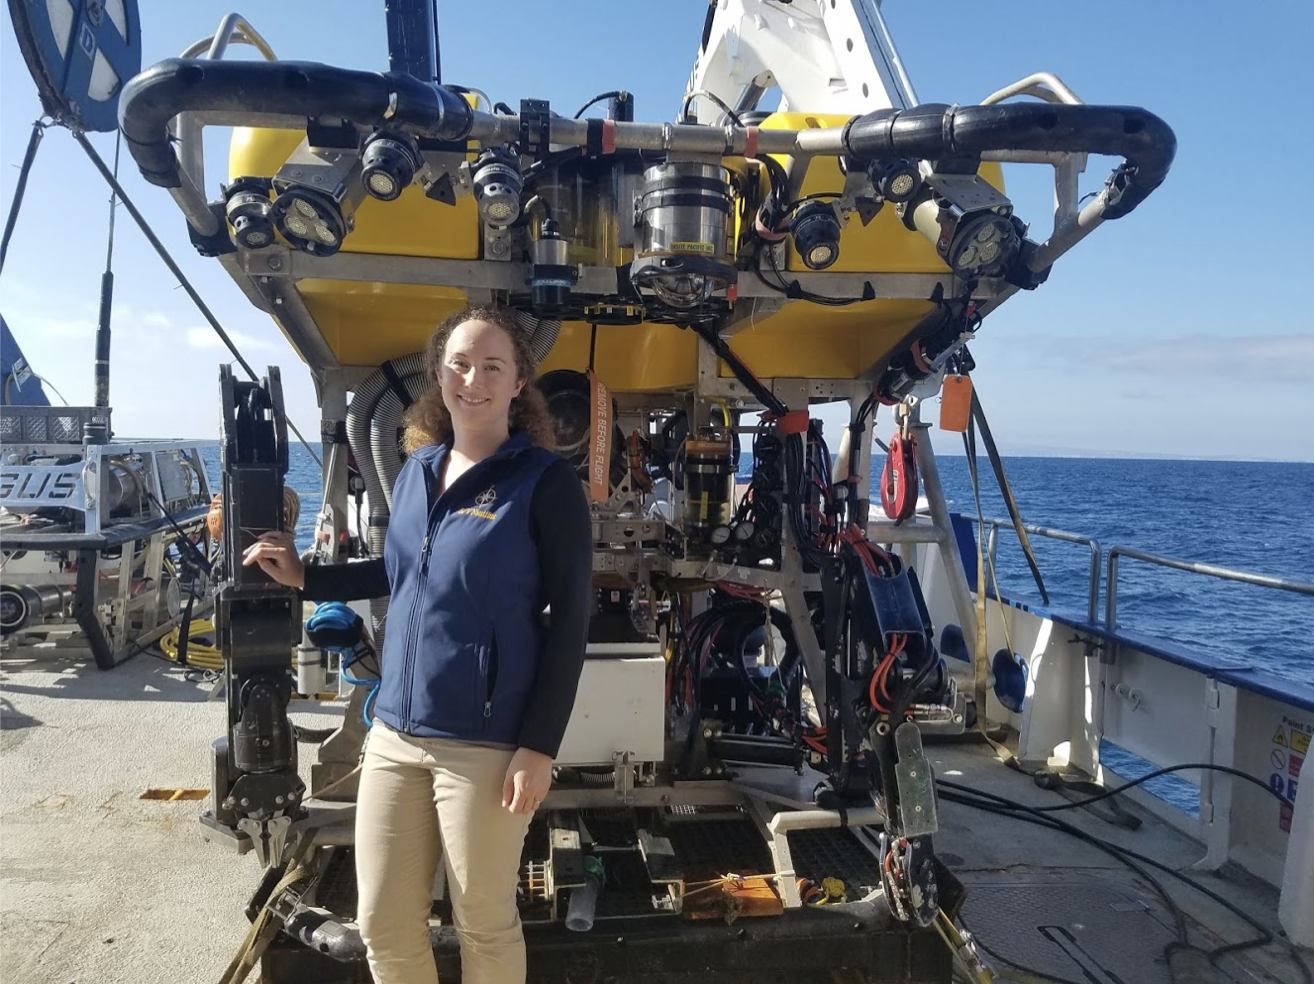 Me, during my professional internship with NOAA National Marine Sanctuaries. I am on-board the E/V Nautilus and standing in front of the ROV Hercules, which we used to explore the Channel Islands National Marine Sanctuary.